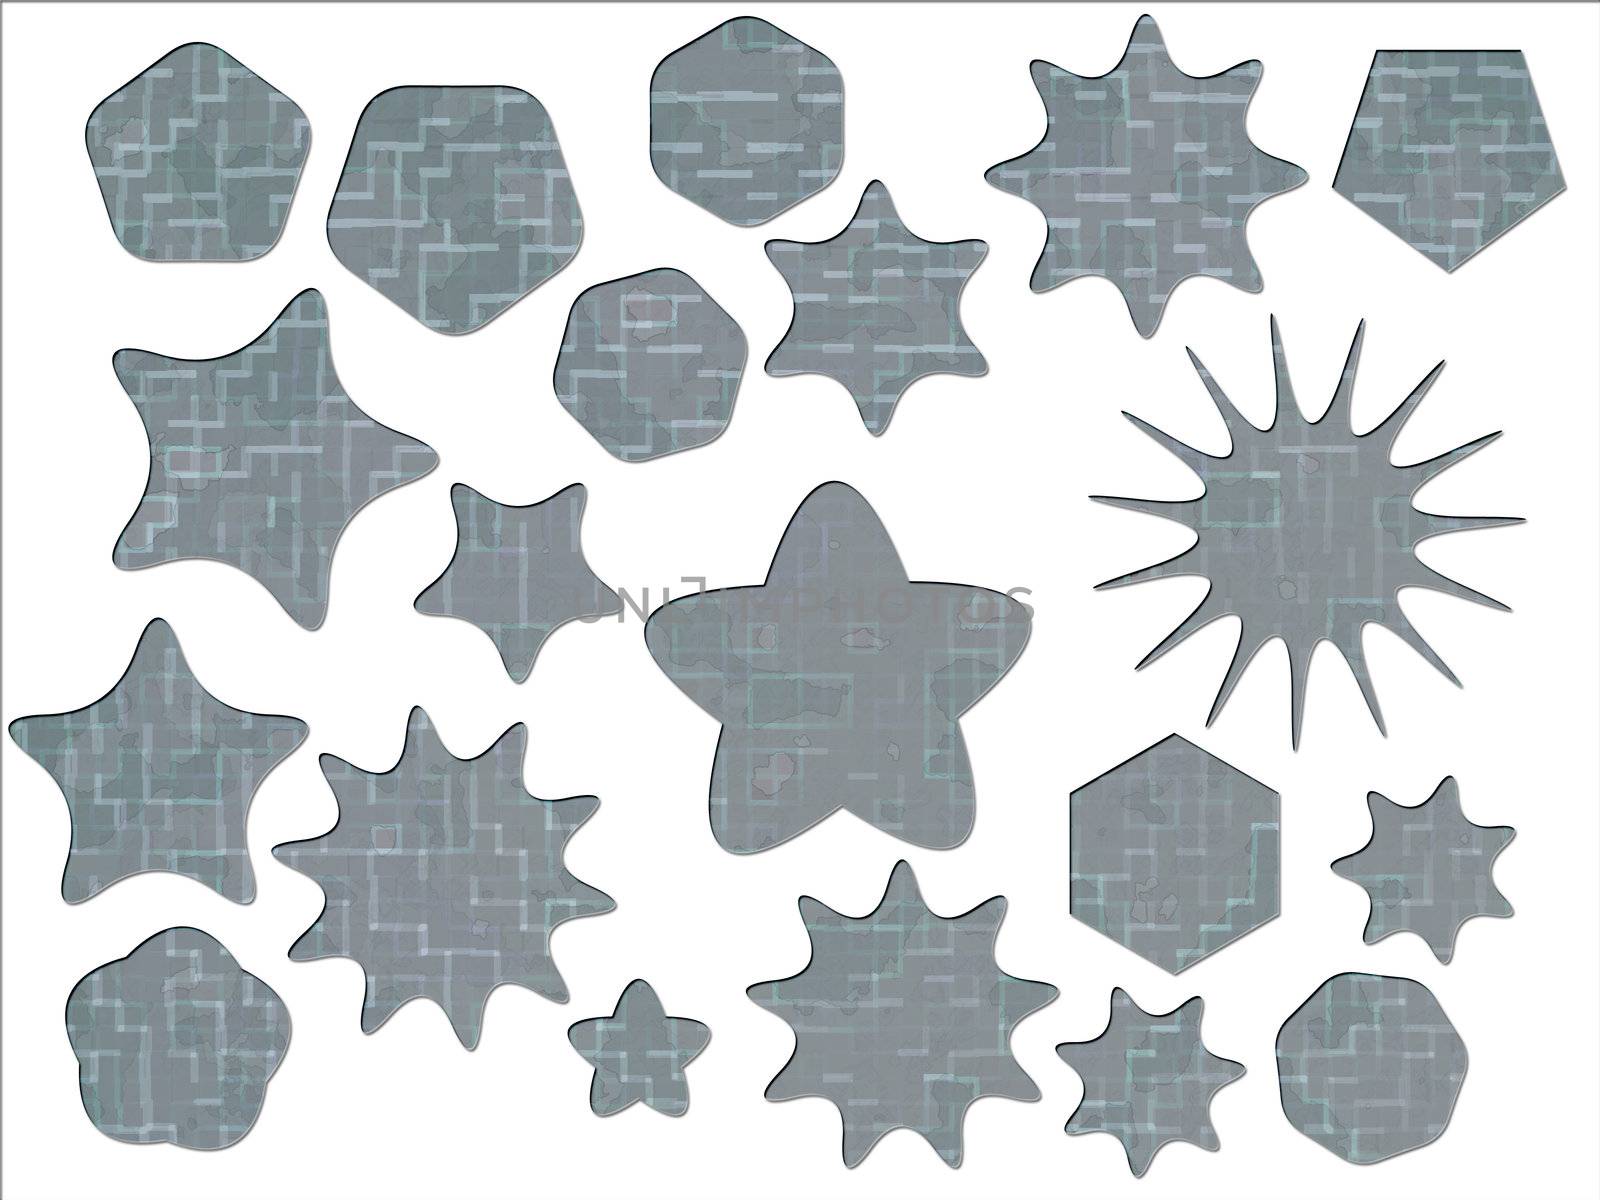 ACU Universal Army Urban Camouflage Effect Special offer Badges and Star Shapes